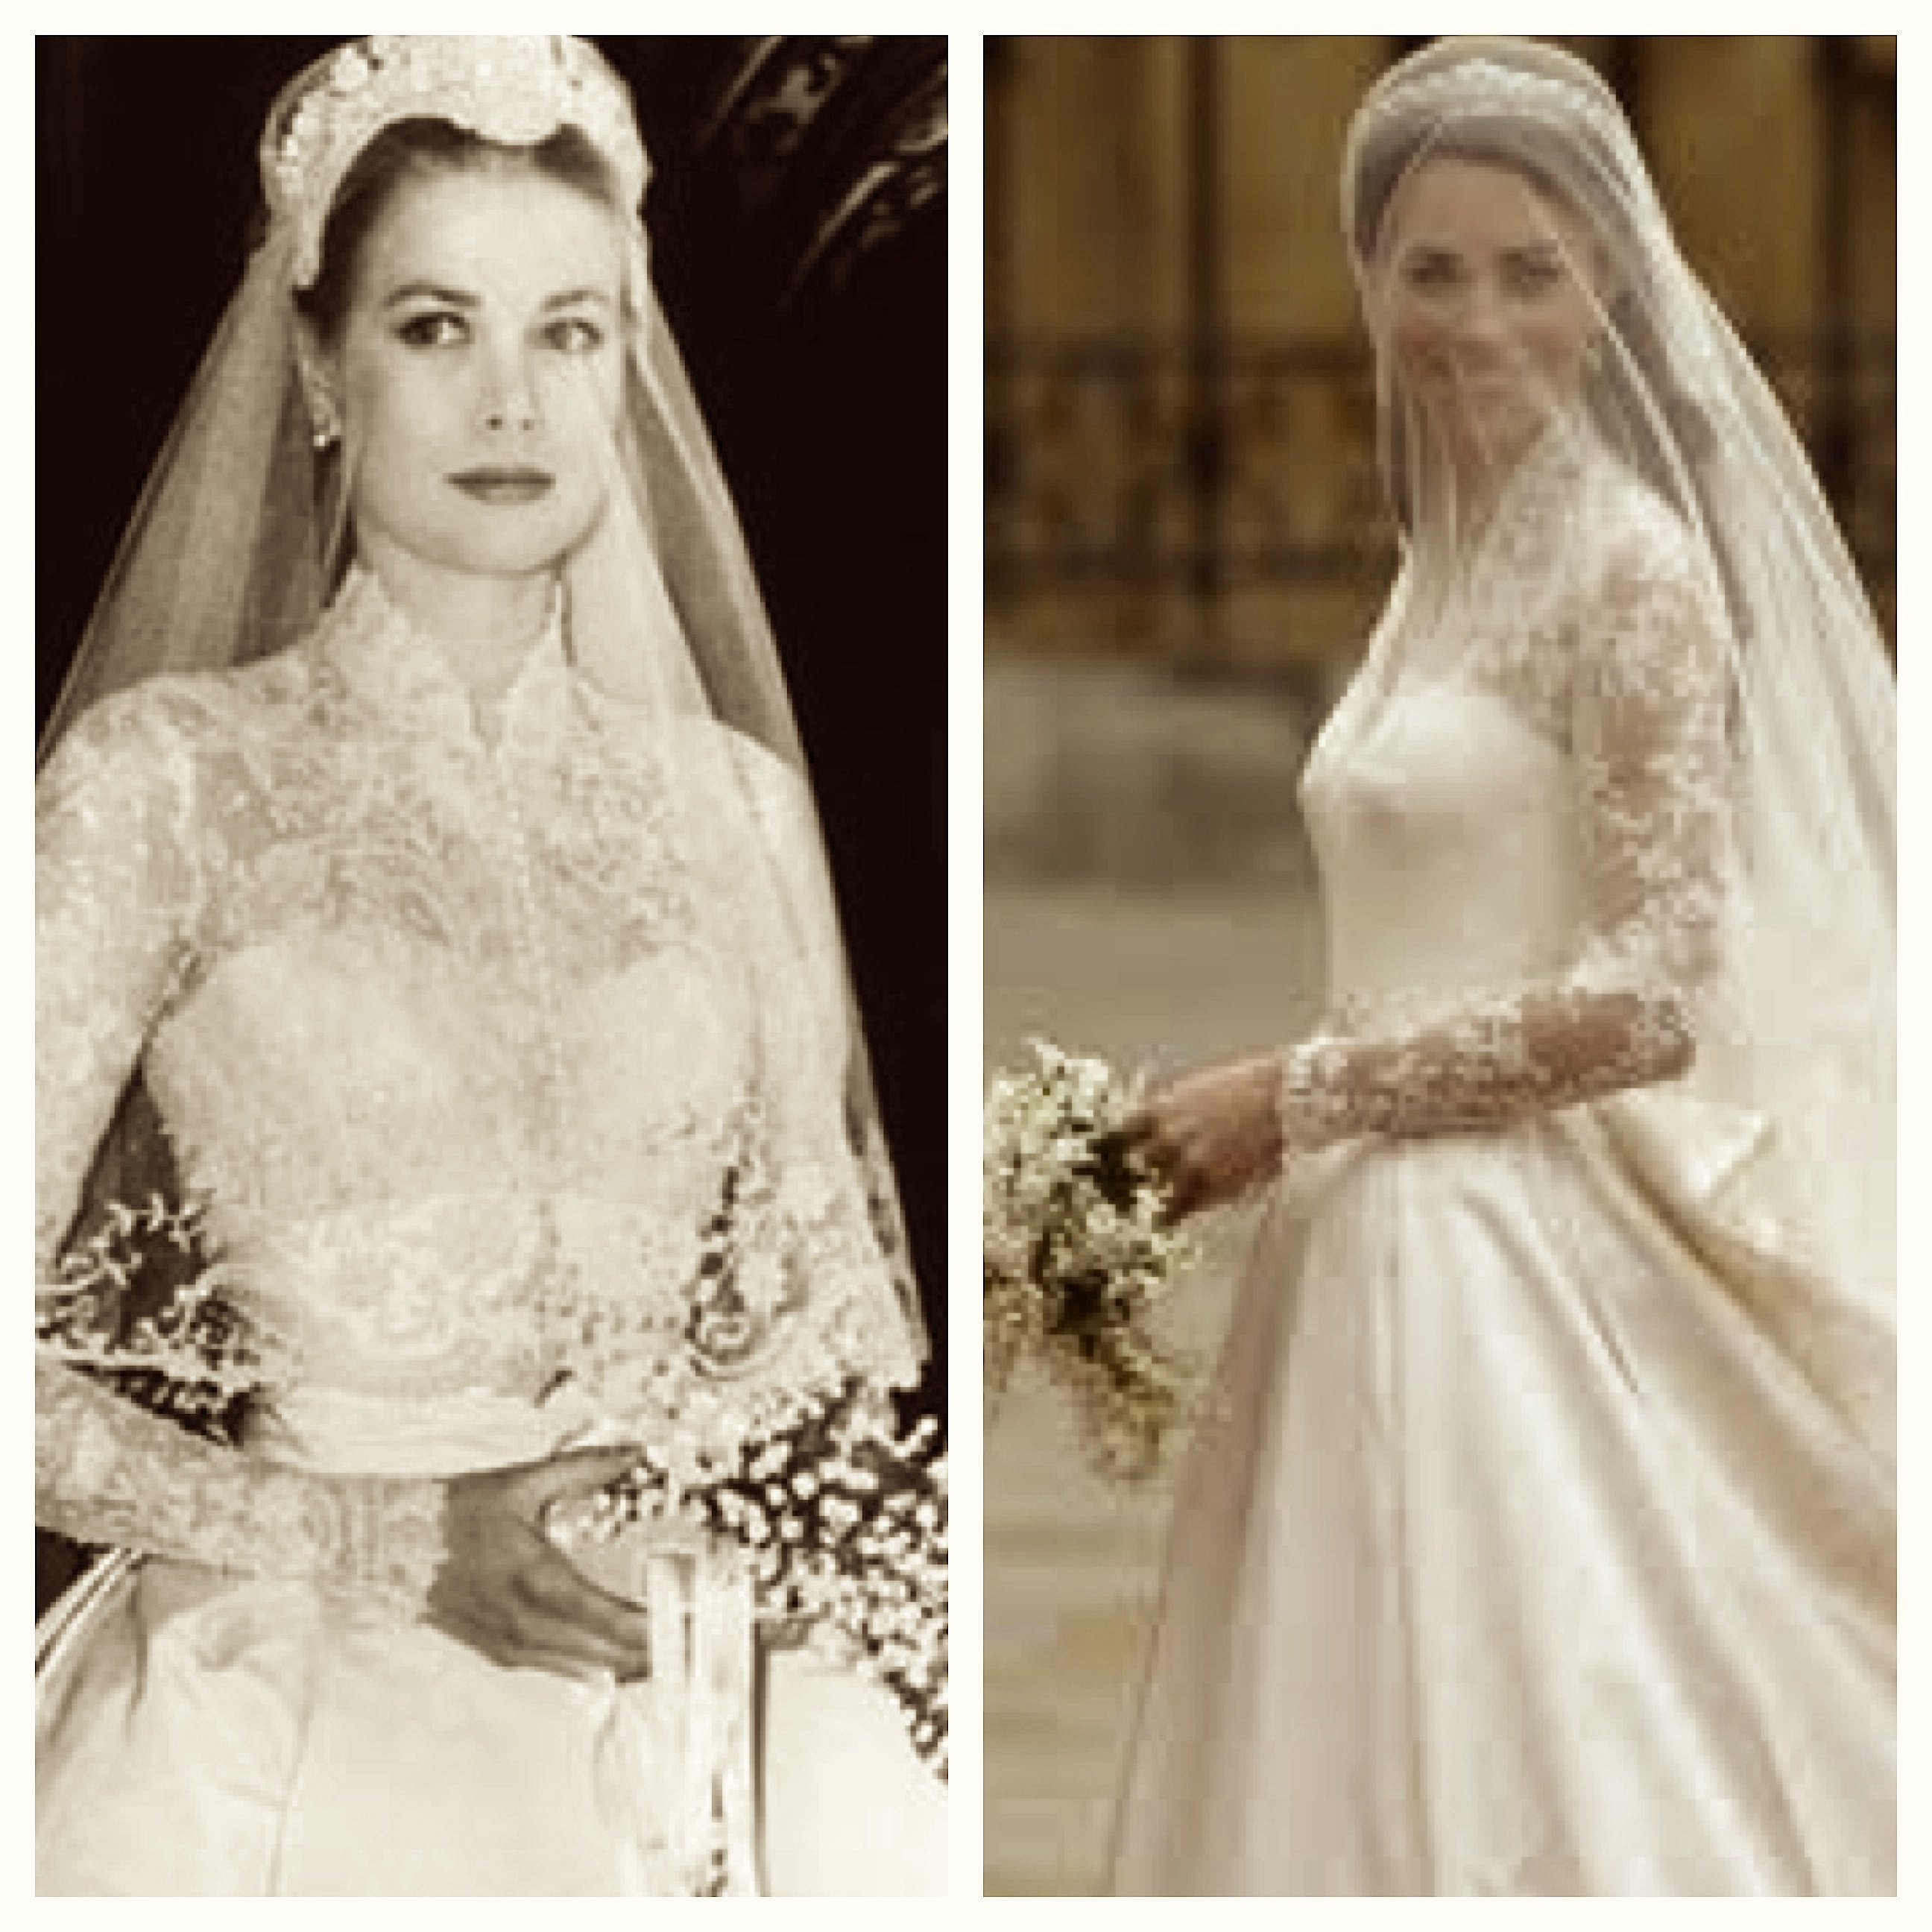 I think Kate looked perfect